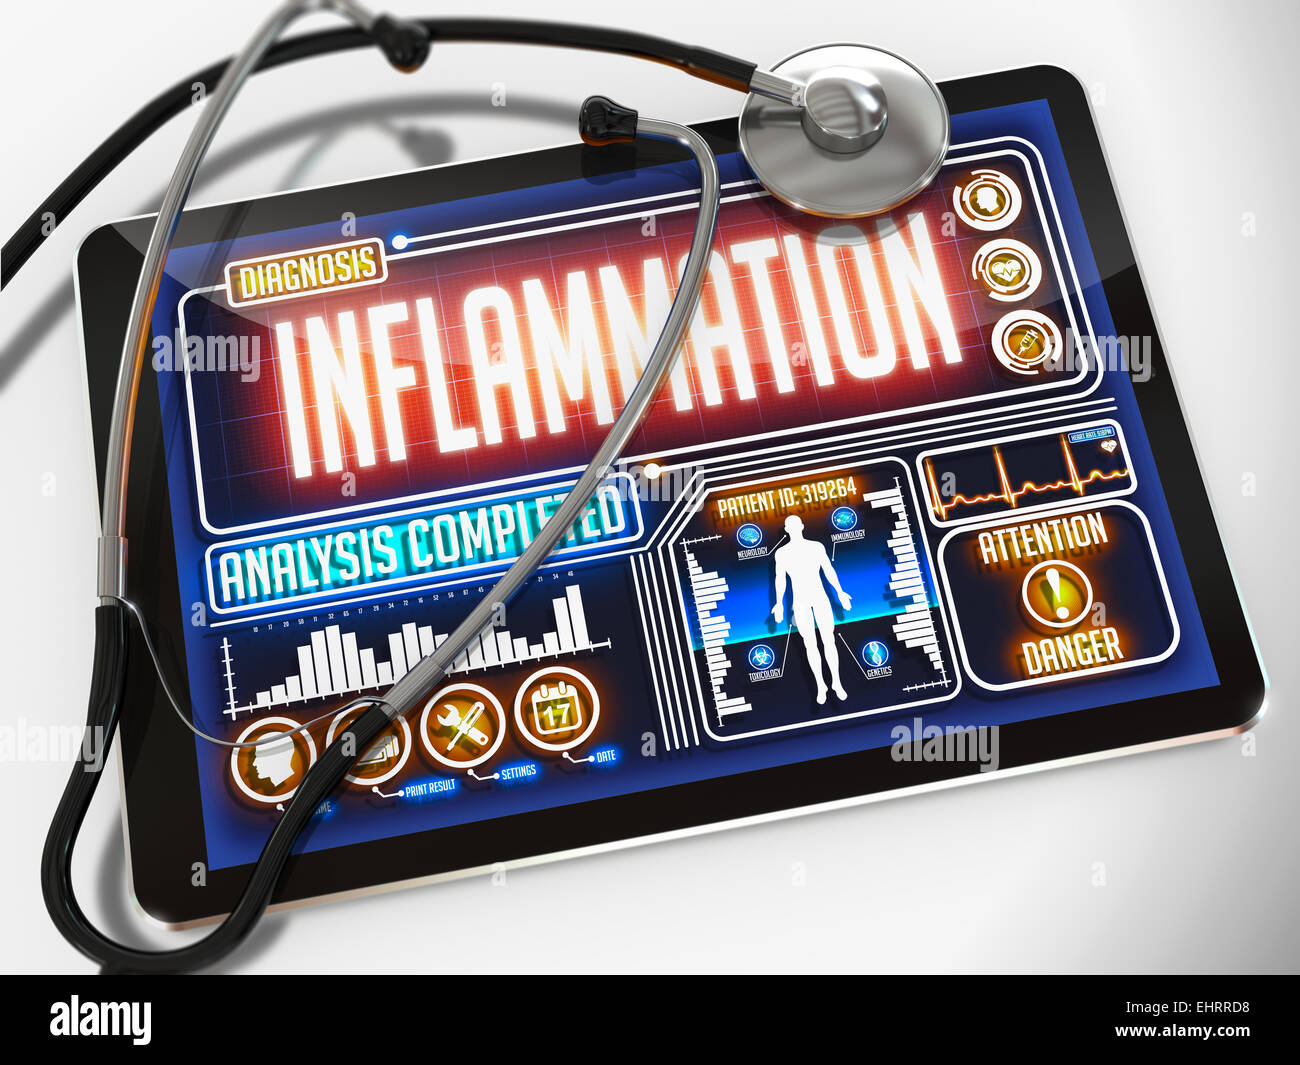 Inflammation on the Display of Medical Tablet. Stock Photo